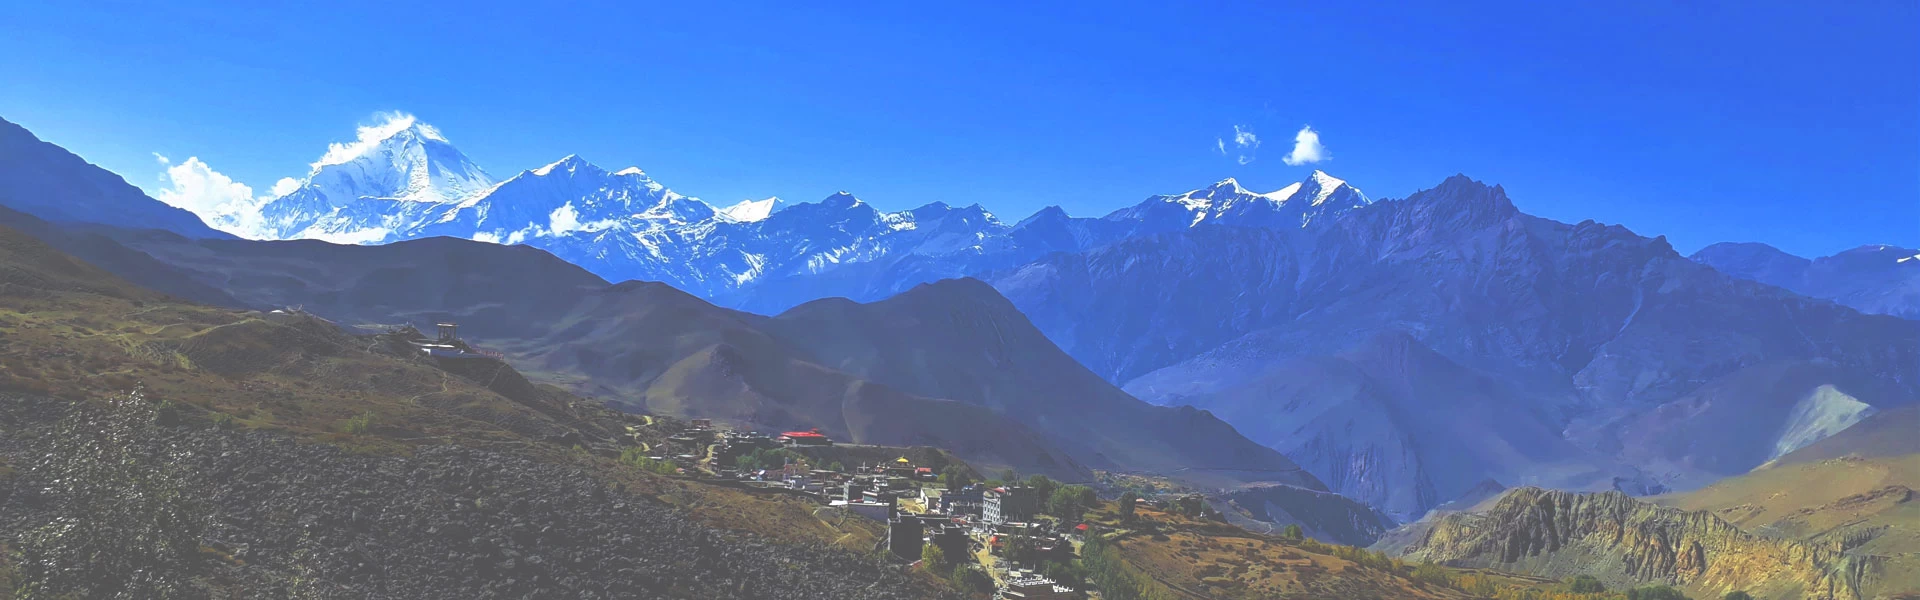 we were mesmerized with excellent sight of Muktinath temple and it's surroundings.